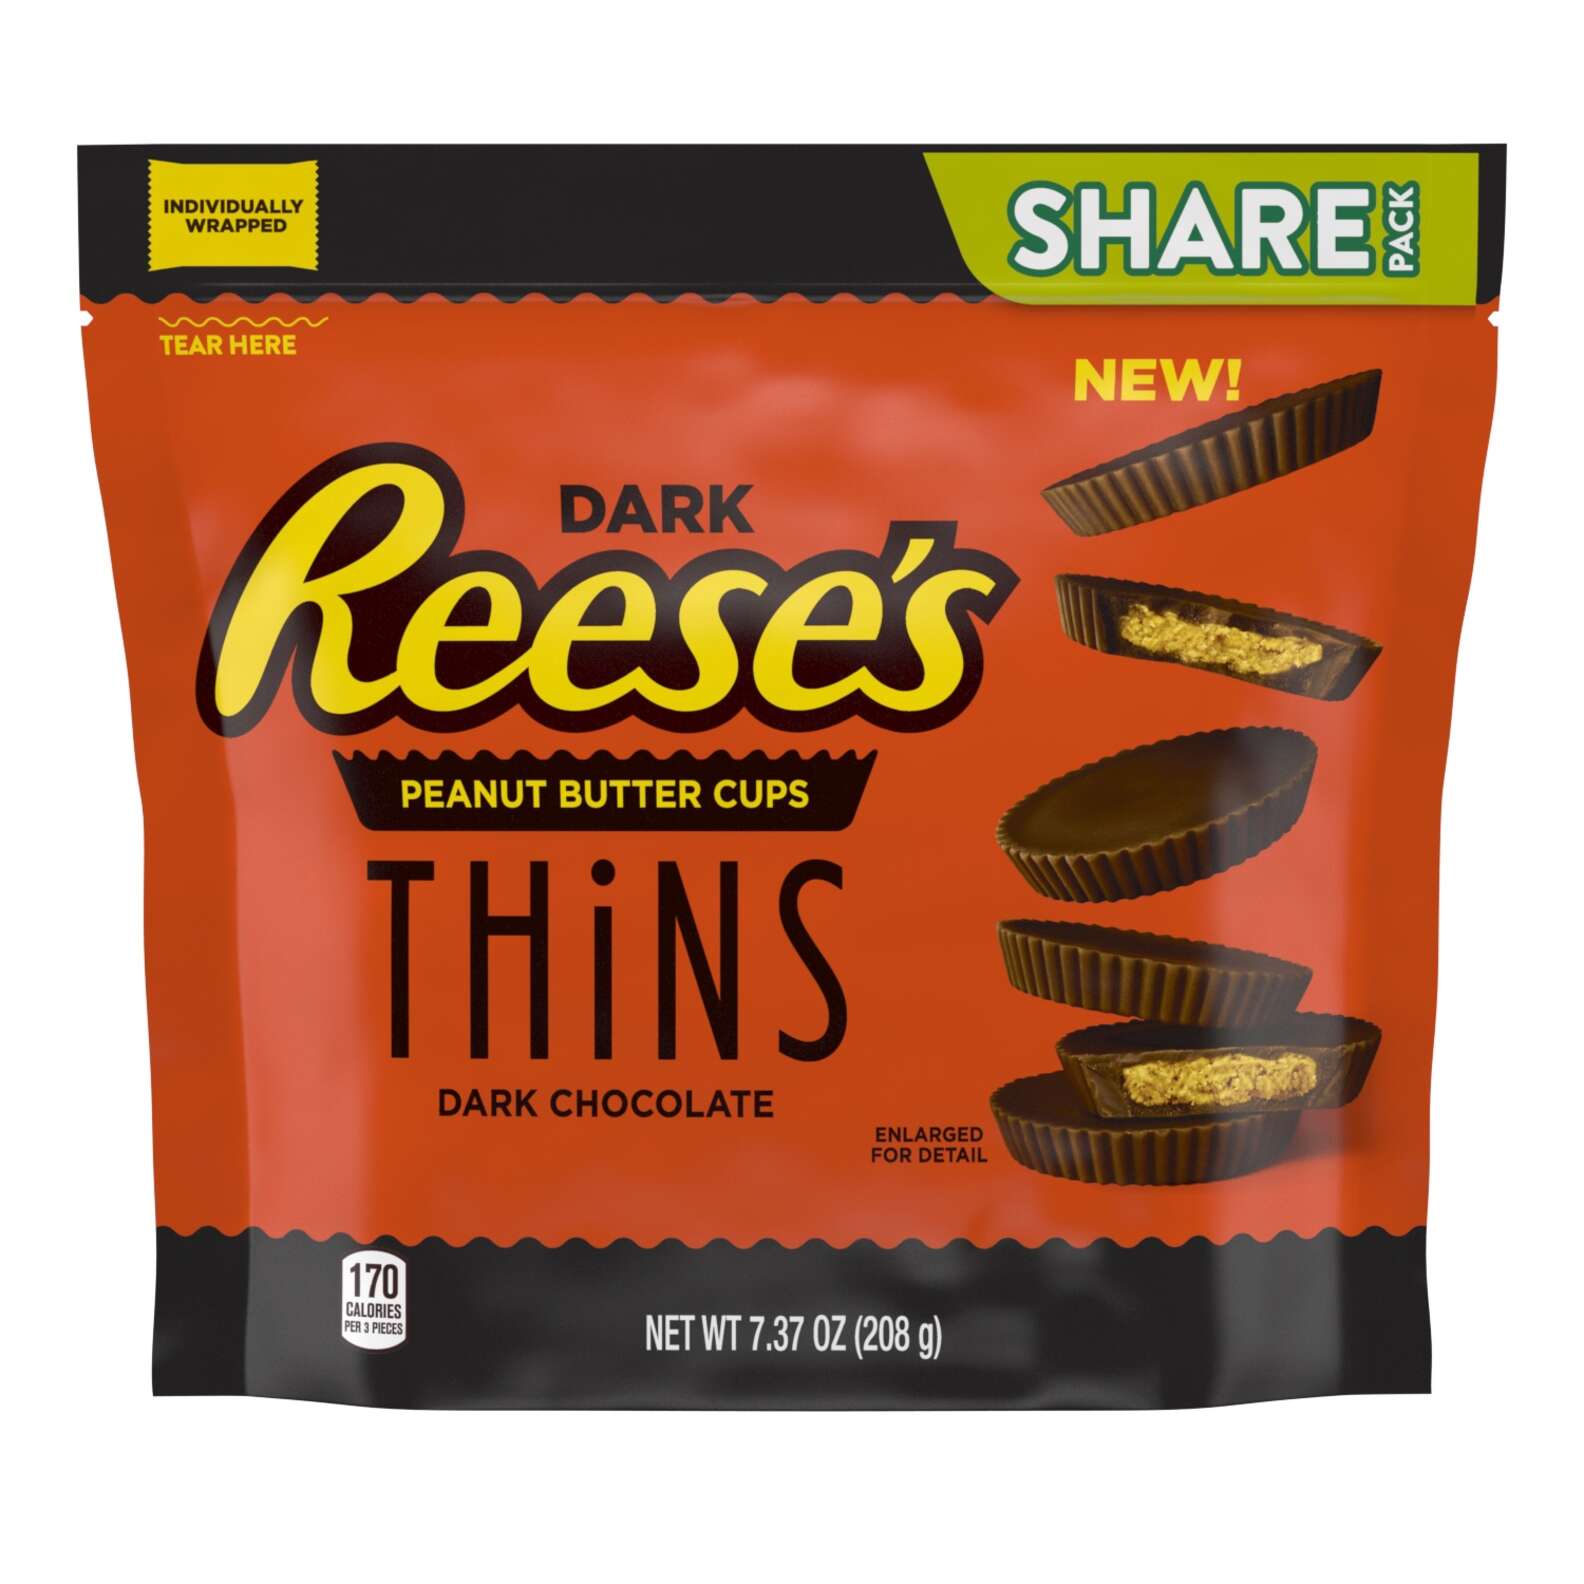 Butter cups. Reeses шоколад. Reeses конфеты. Конфеты Reese's. Шоколадка Reeses.